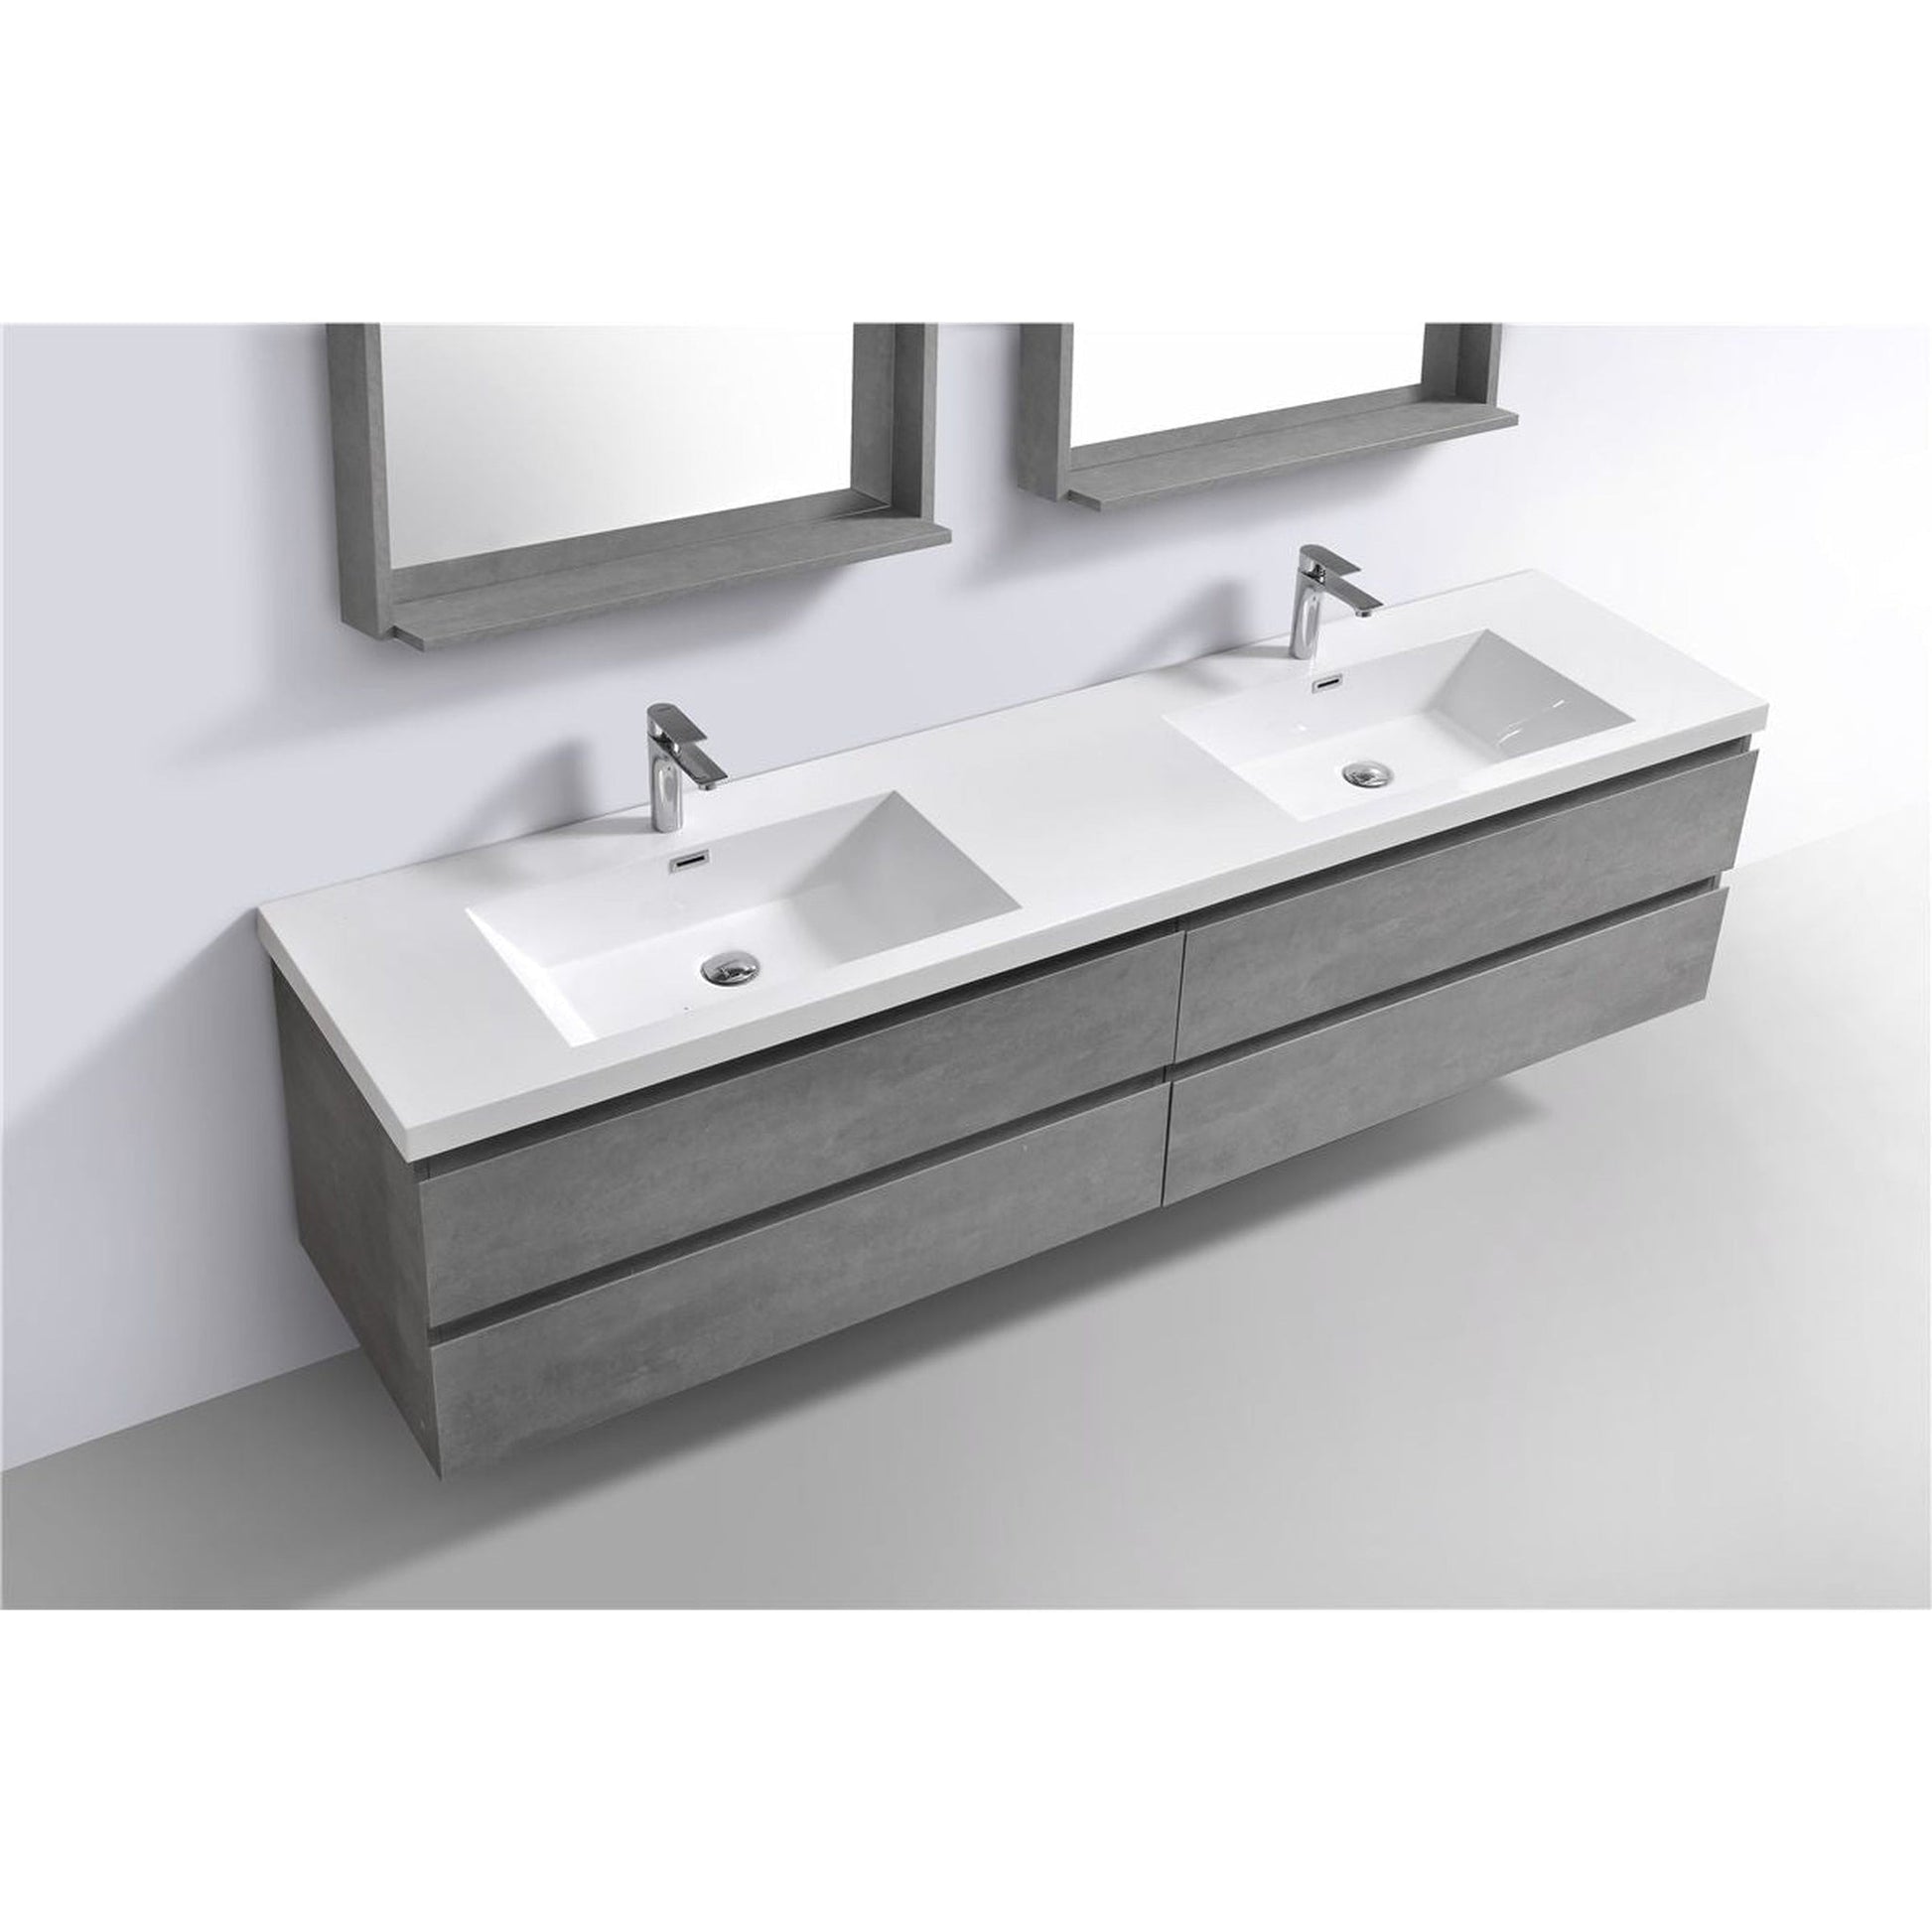 Moreno Bath Bohemia Lina 72" Cement Gray Wall-Mounted Vanity With Double Reinforced White Acrylic Sinks